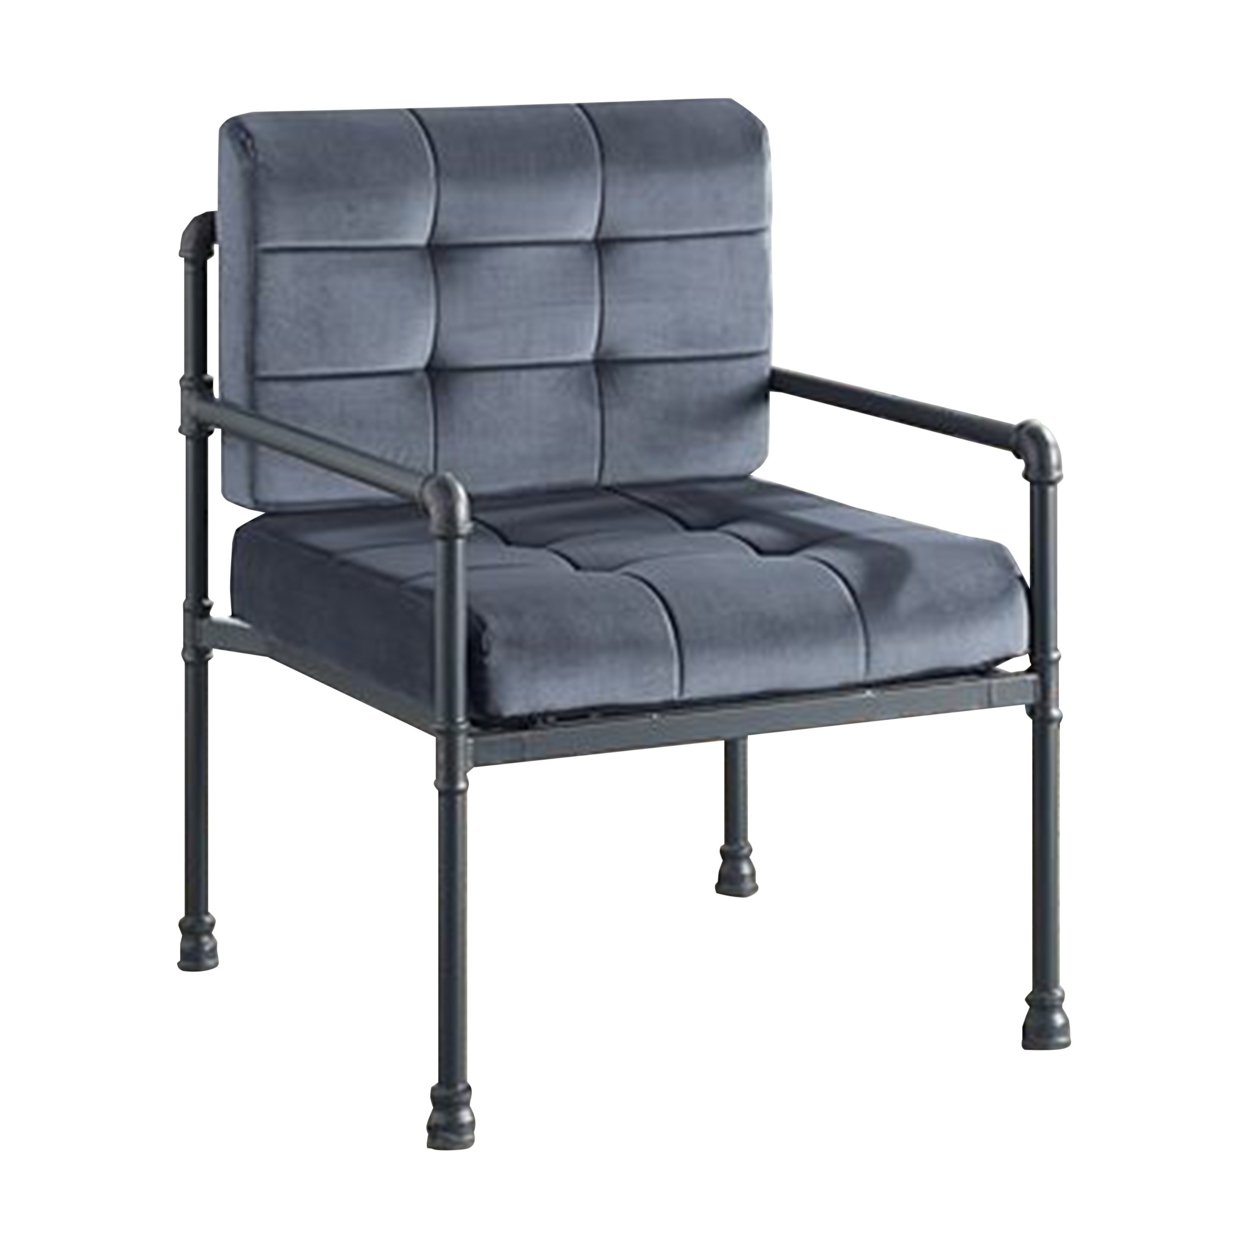 Accent Chair With Tufted Velvet Seat And Metal Frame, Gray- Saltoro Sherpi